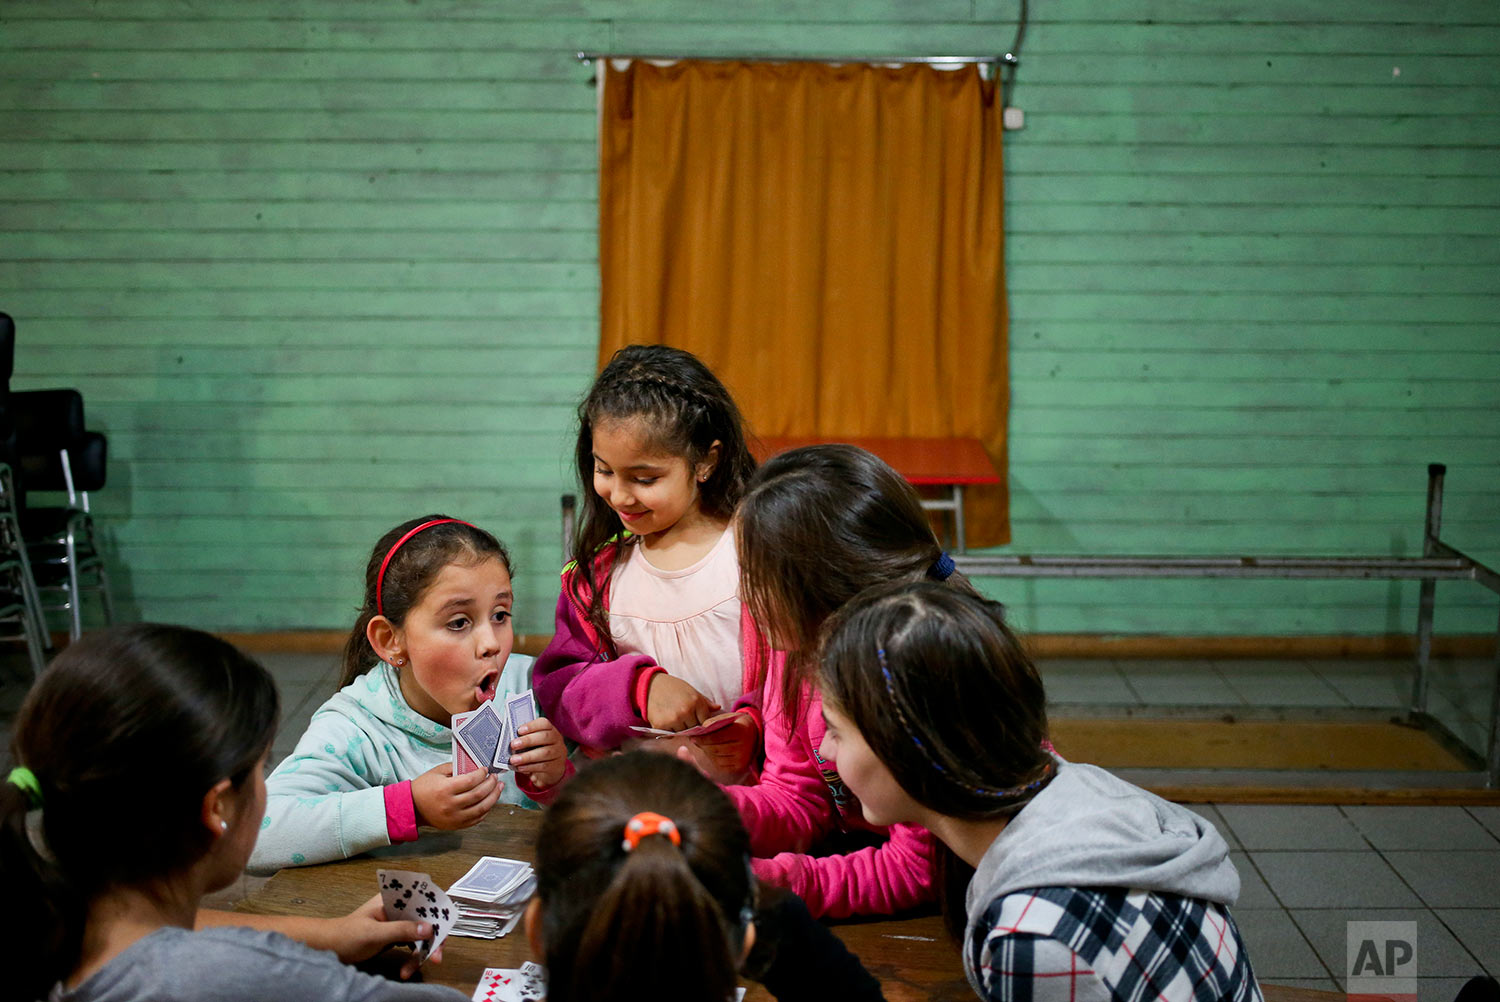  In this June 30, 2017 photo, transgender girl Selenna, left, plays cards during a break with other girls during a dance class at her community center in Santiago, Chile. Selenna's mother, Evelyn Silva, said she struggled to find a school that would 